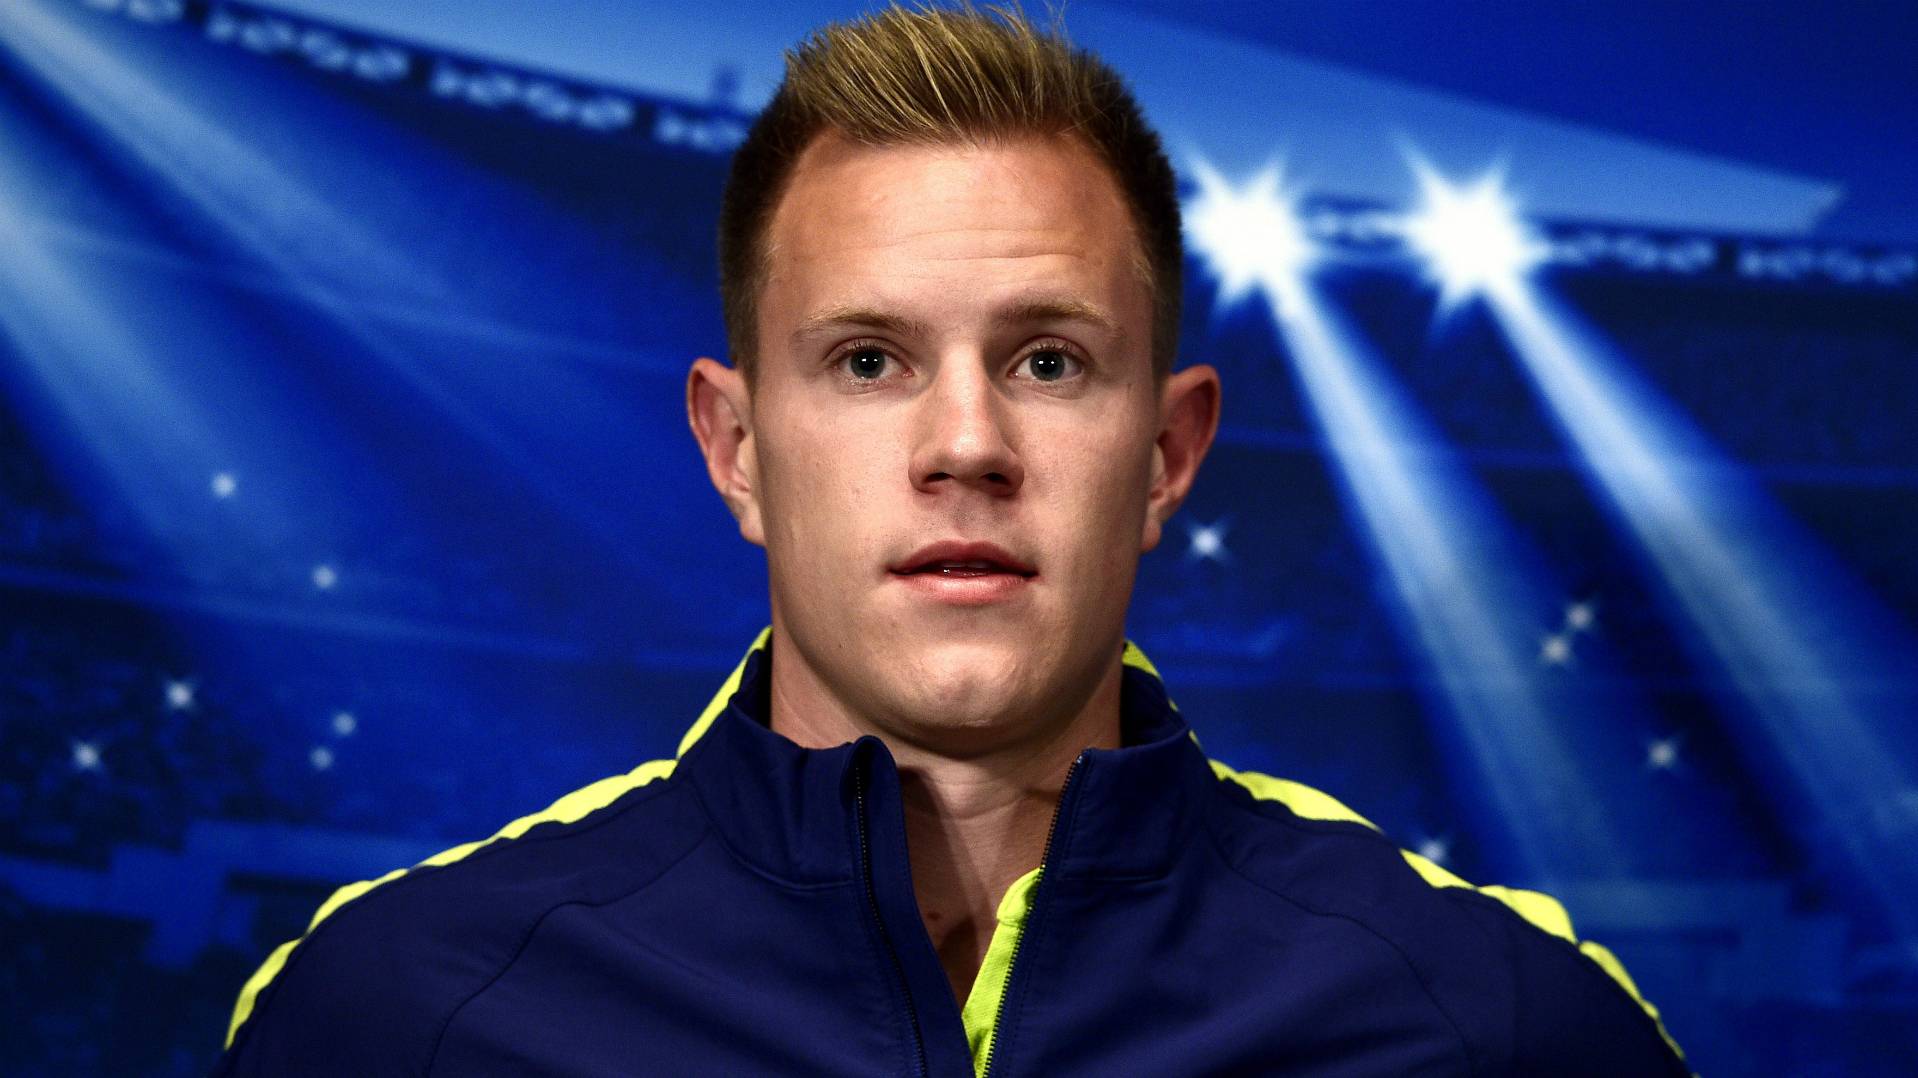 Ter Stegen, before a press conference of Champions